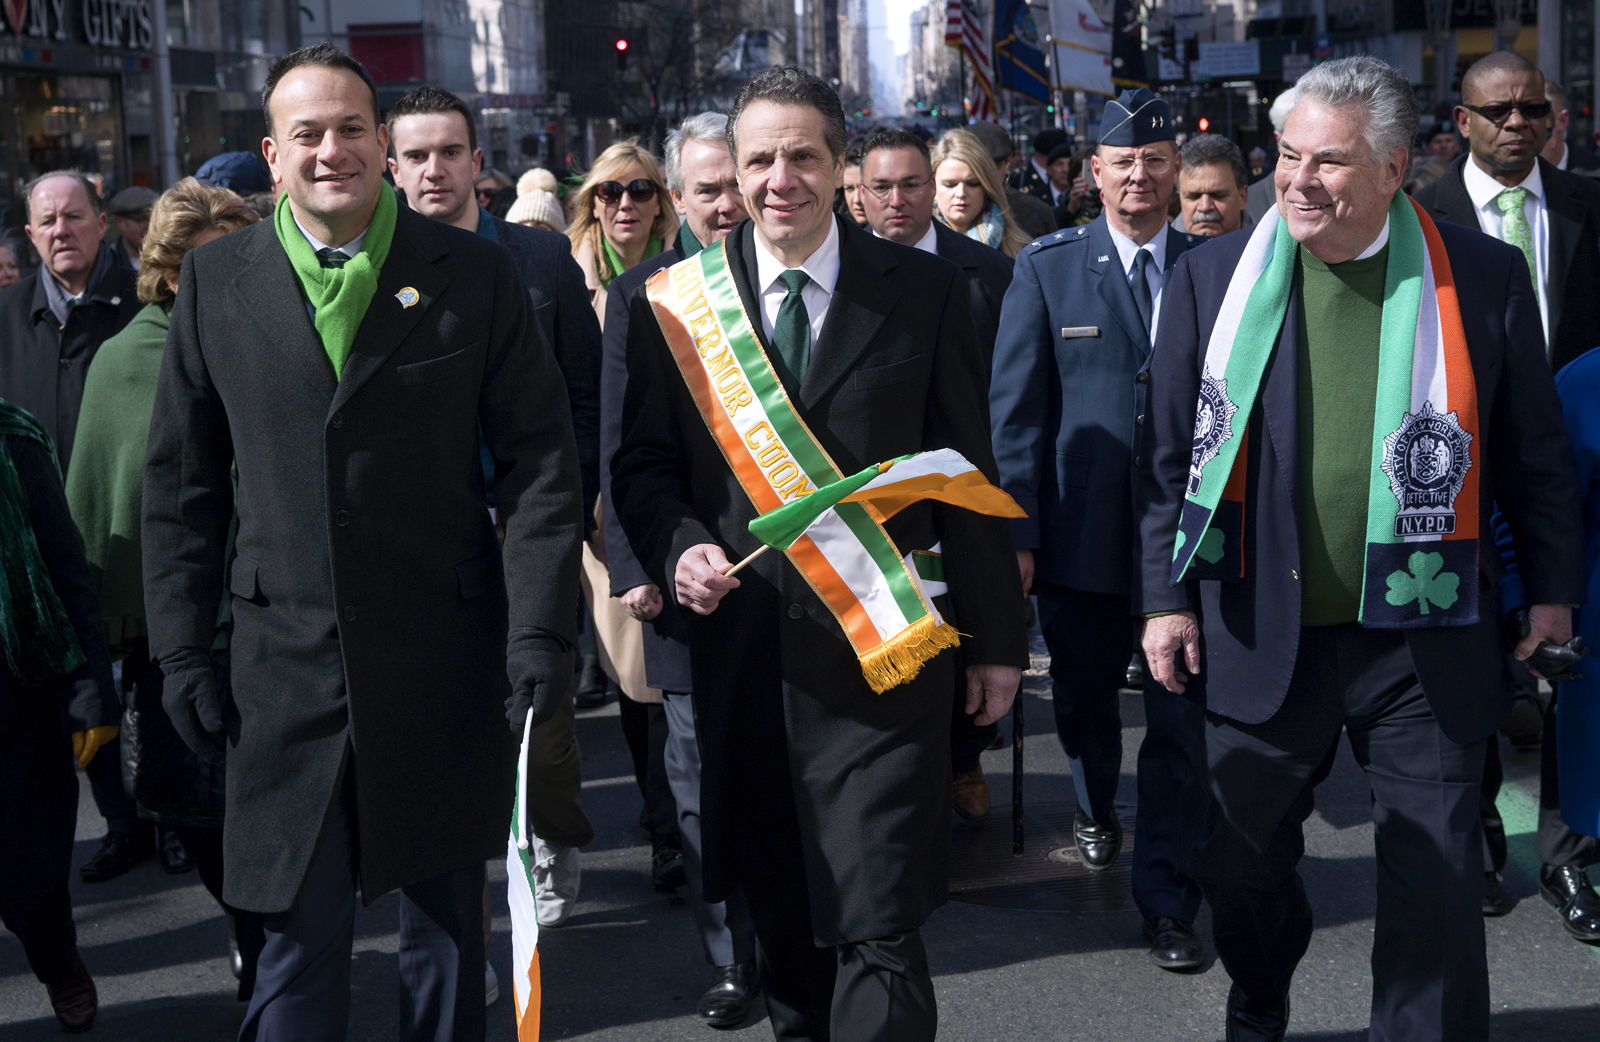 From left, Irish Prime Minister Leo Varadkar, New York Democratic Gov. Andrew Cuomo and Rep. Peter King, R-N.Y., walk along Fifth Avenue during the St. Patrick's Day parade Saturday, March 17, 2018, in New York.  A big event since the mid-1800s, the parade has been a celebration of Irish culture and of Irish immigrants, who once faced nativist calls for their exclusion from the workforce,  and from the country, when they began arriving in the city in huge numbers during the Irish Famine. (AP Photo/Craig Ruttle)